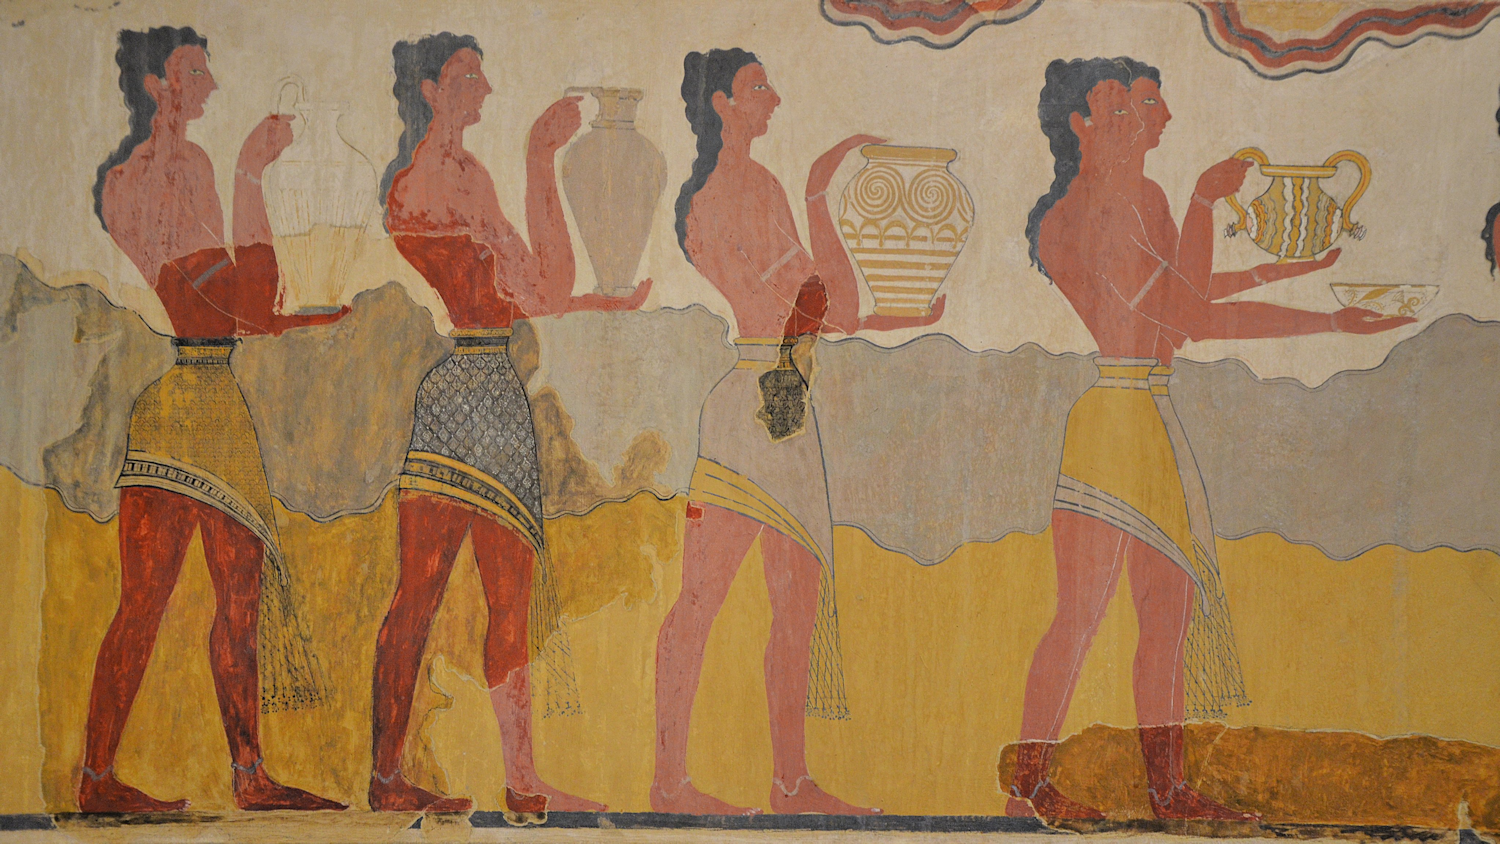 Procession Fresco from Knossos, Neopalacial period, 1600 - 1450 BC, Heraklion Archaeological Museum